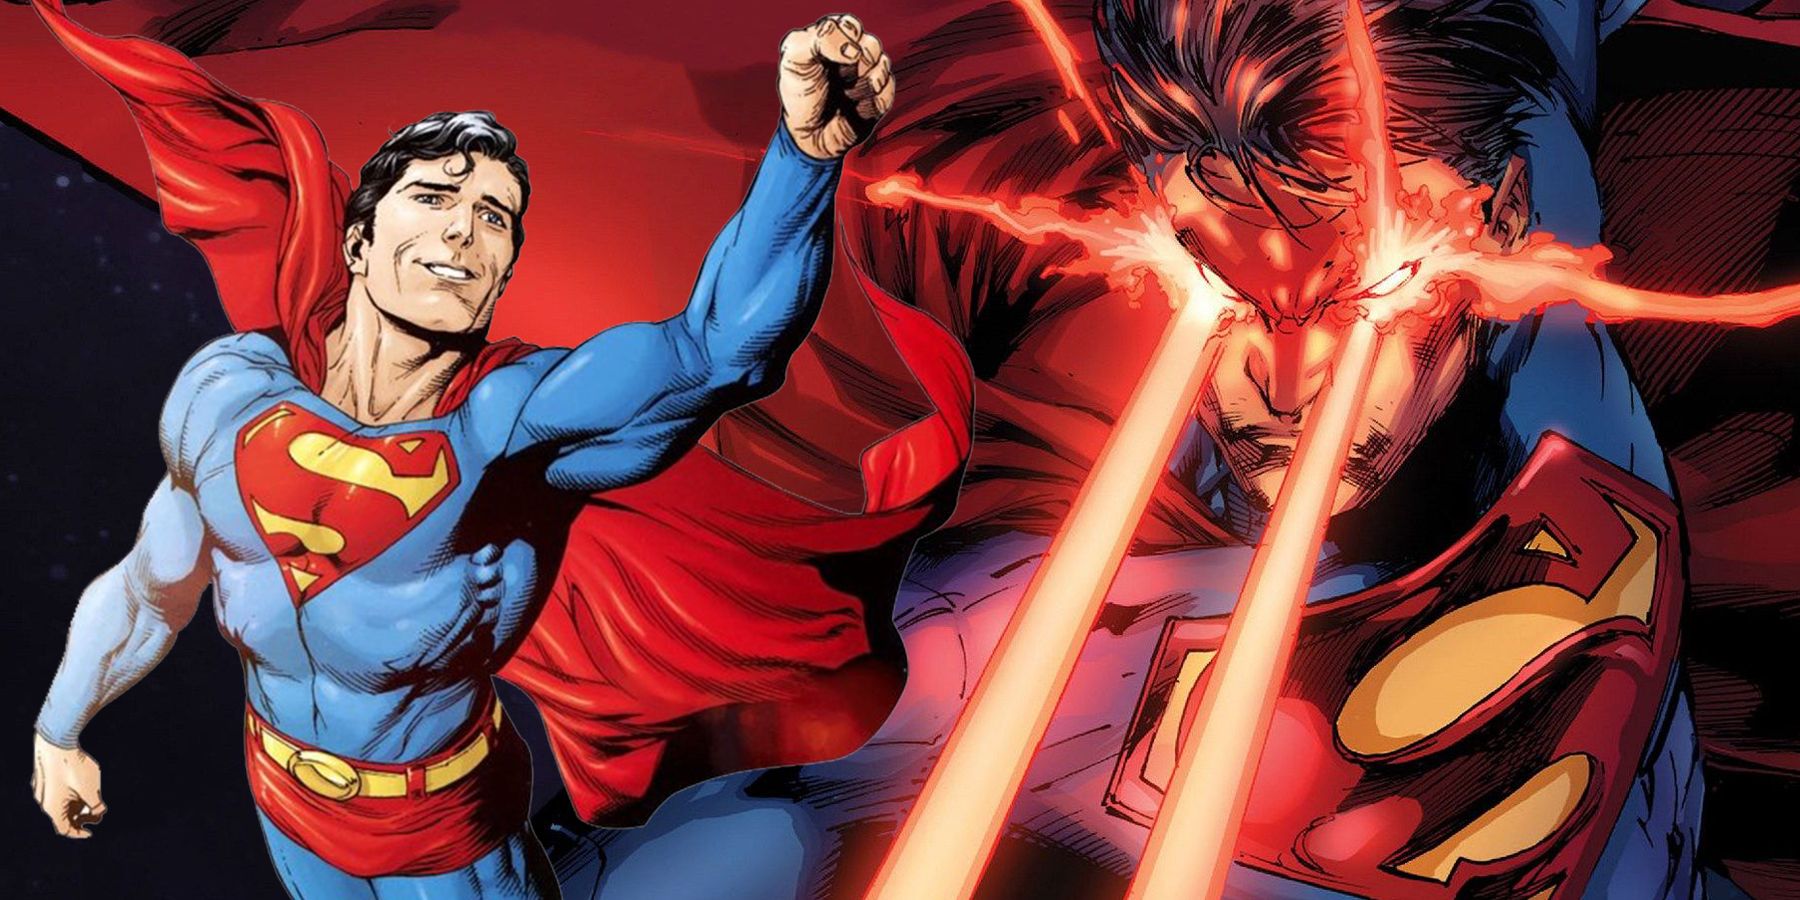 Superman flying and using heat vision